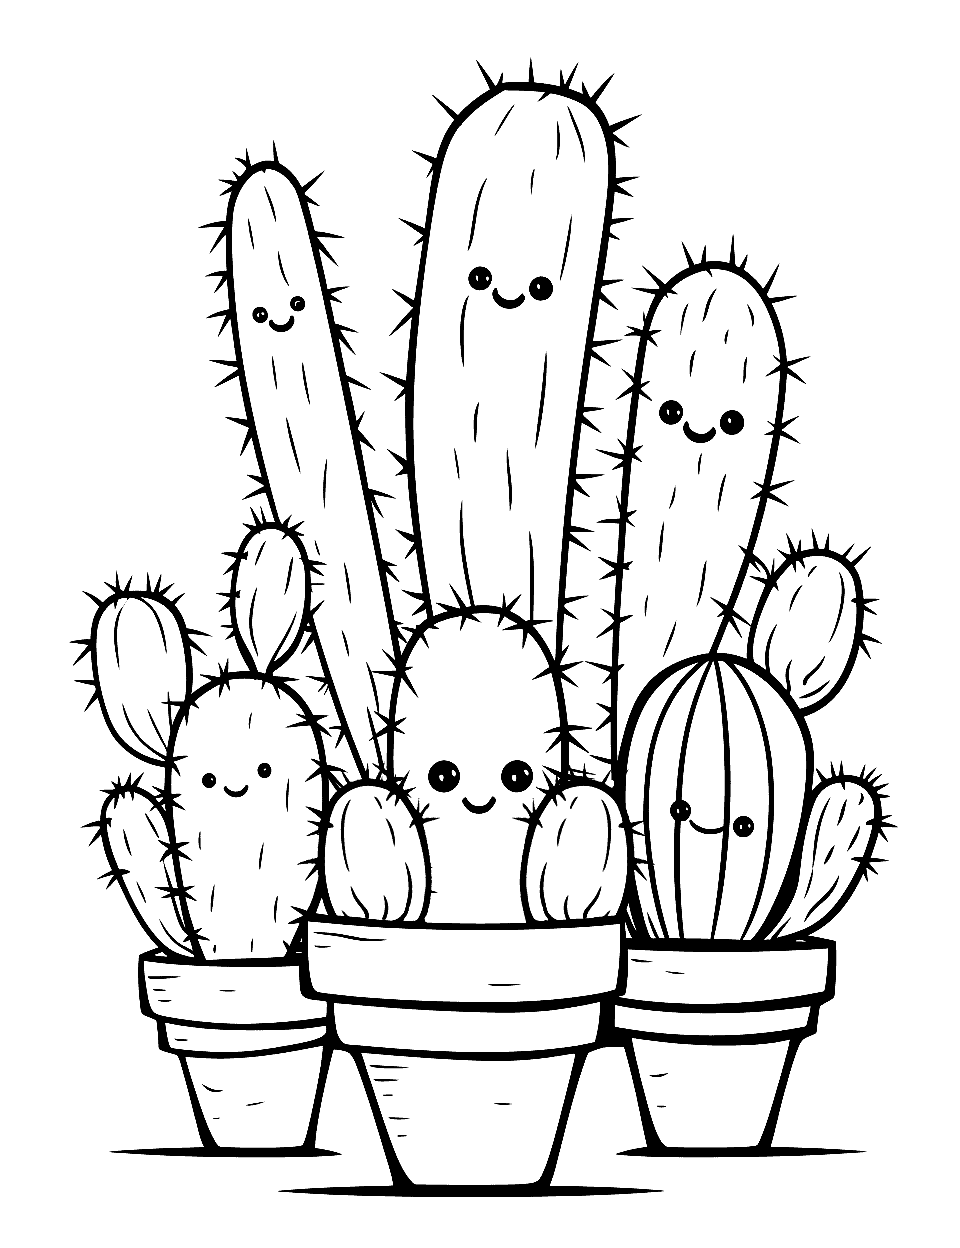 Cute Cactus Garden Coloring Page - Several cute cacti with smiling faces, planted in a whimsical garden setting.